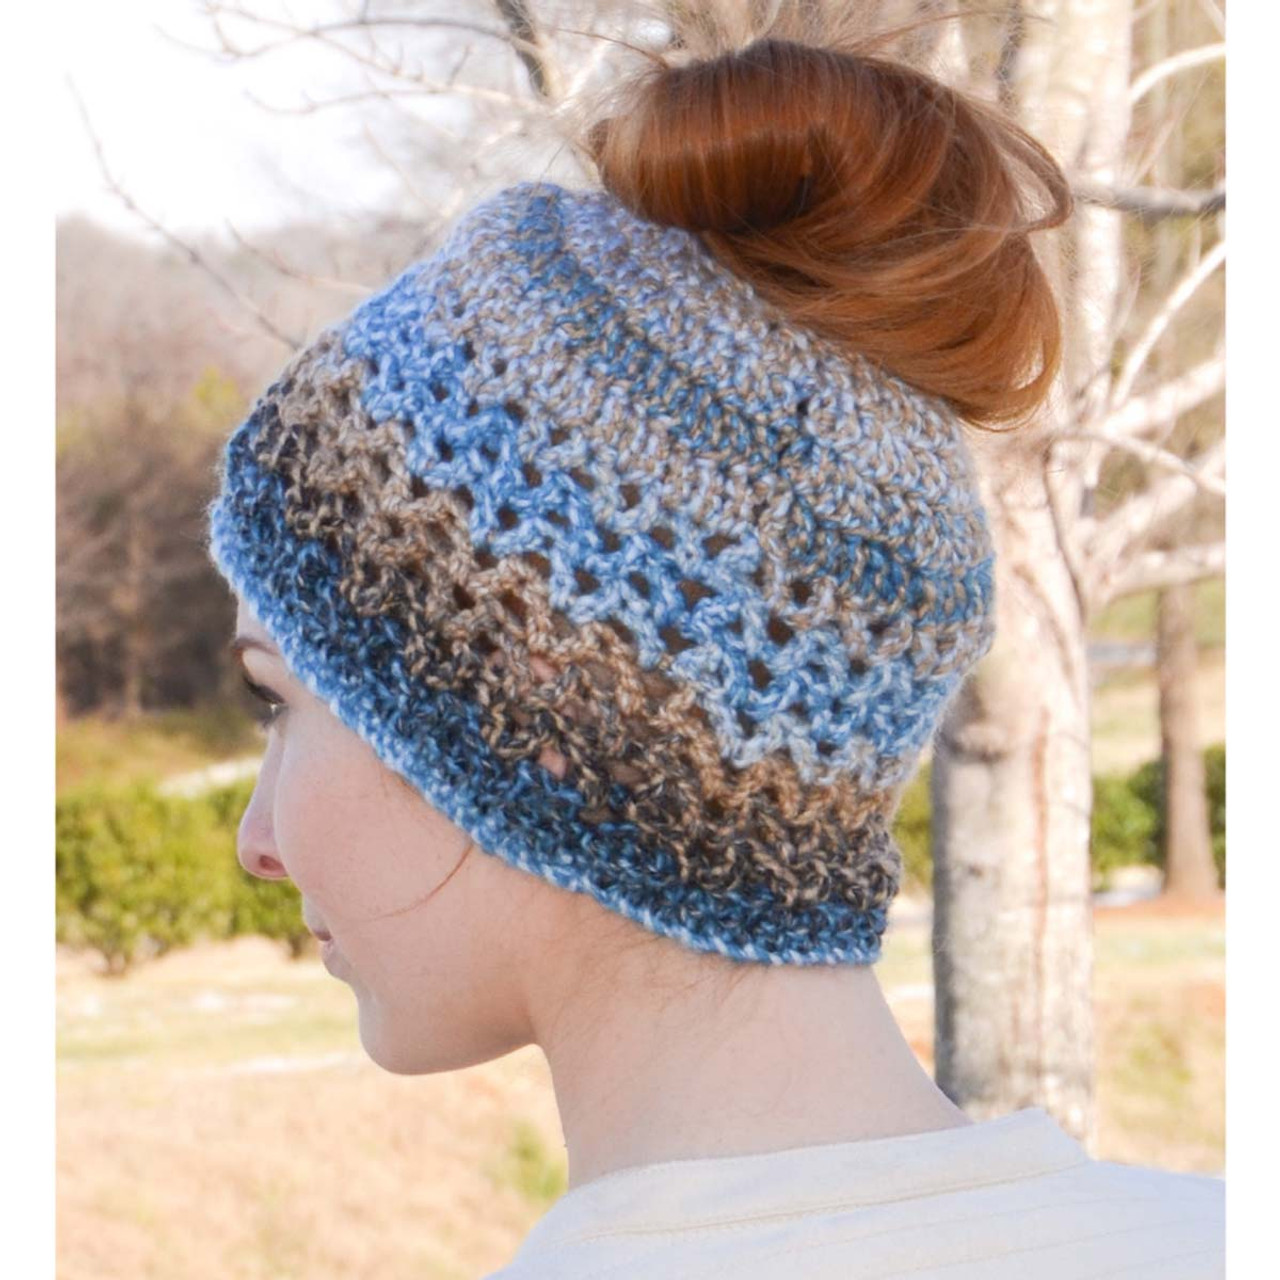 Make it yourself Crochet Kit Super chunky beanie hat kit (adult size)